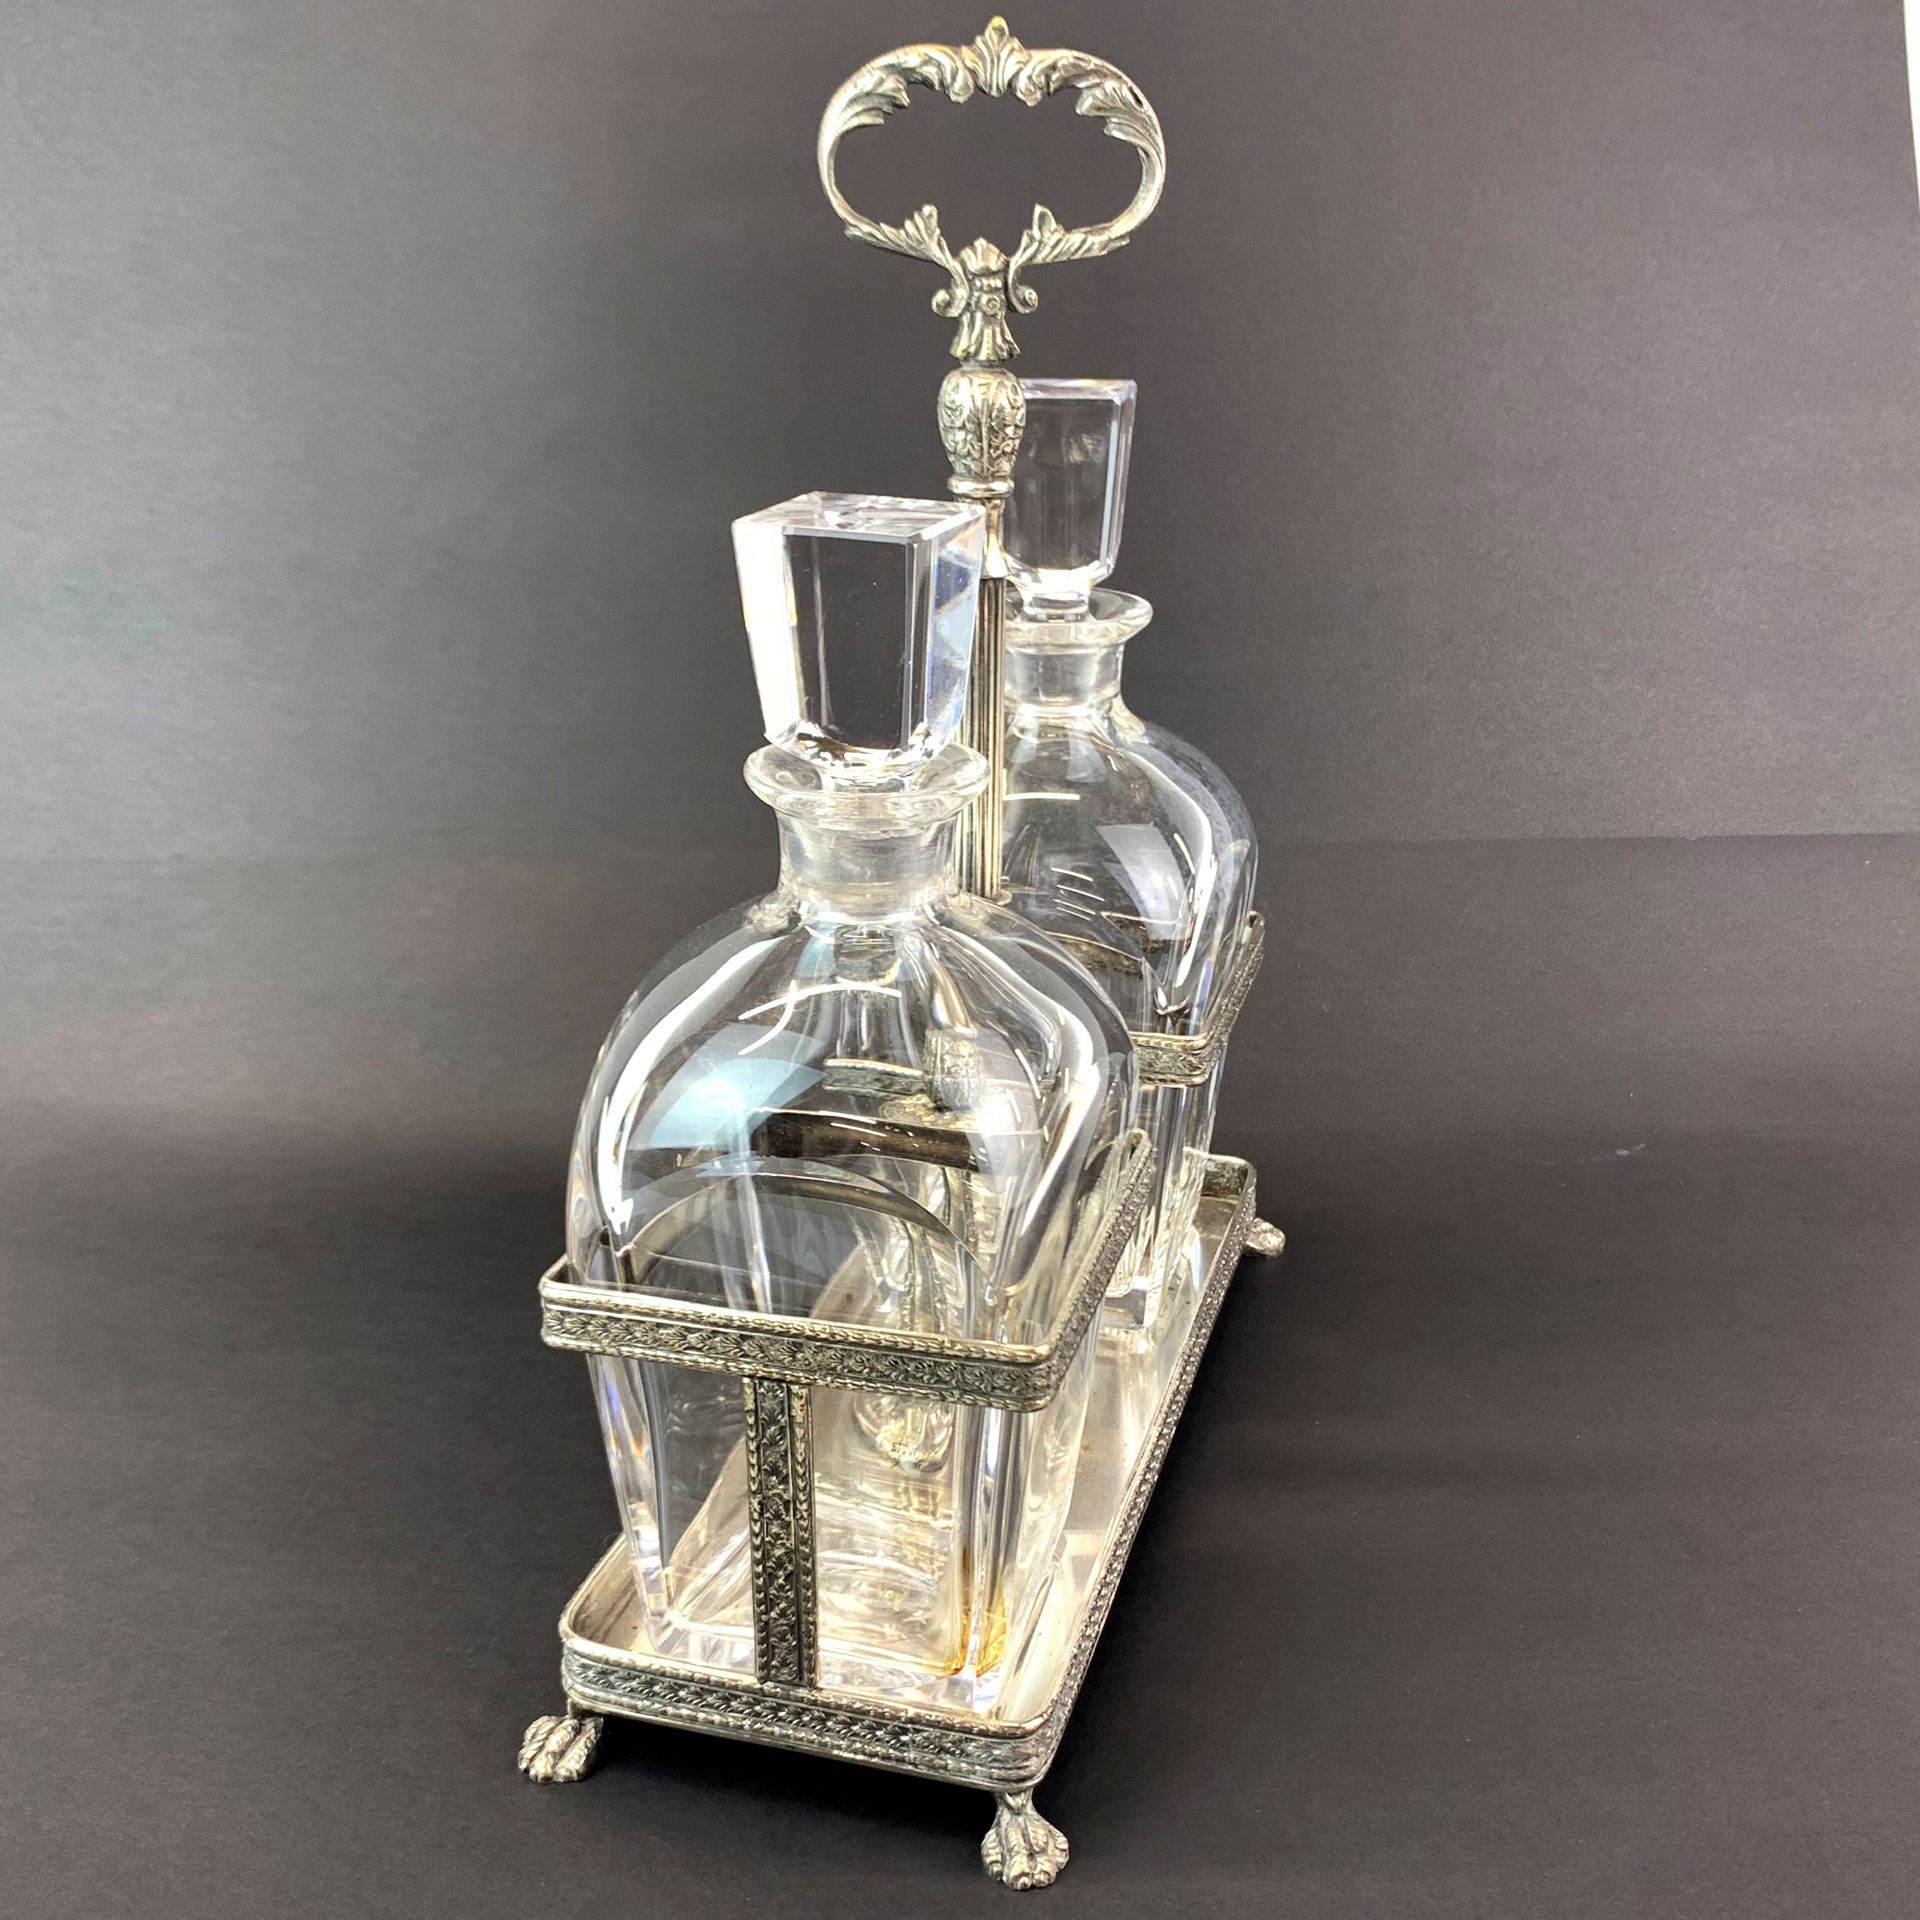 A silver plated decanter stand with two Kosta Sweden decanters, W. 25cm. H. 30cm. - Image 2 of 2